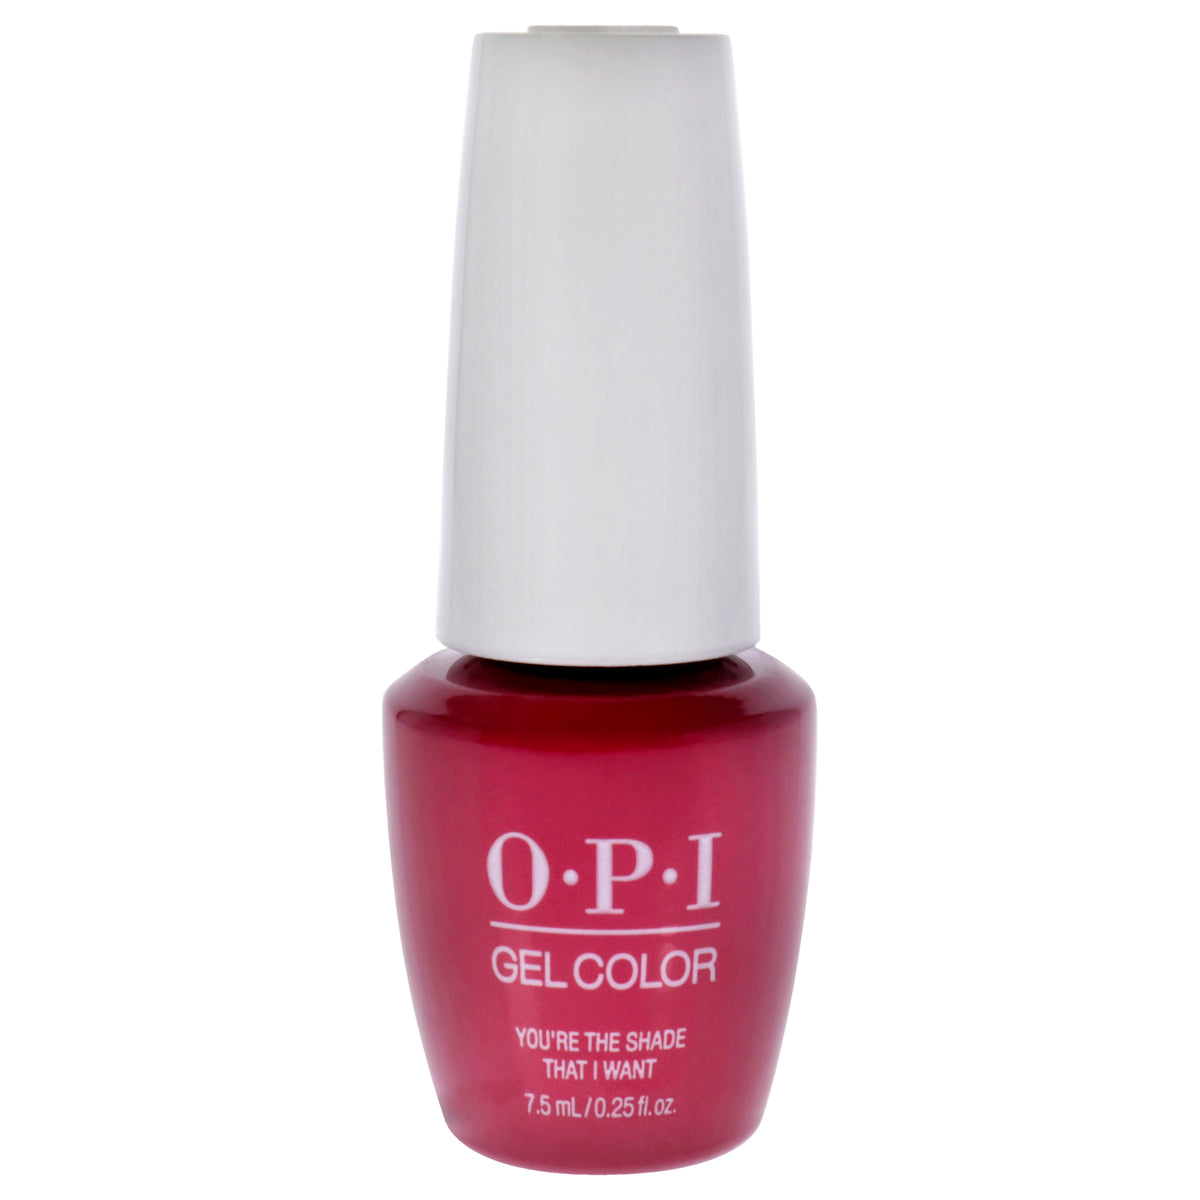 GelColor - GC G50B Youre the Shade That I Want by OPI for Women - 0.25 oz Nail Polish